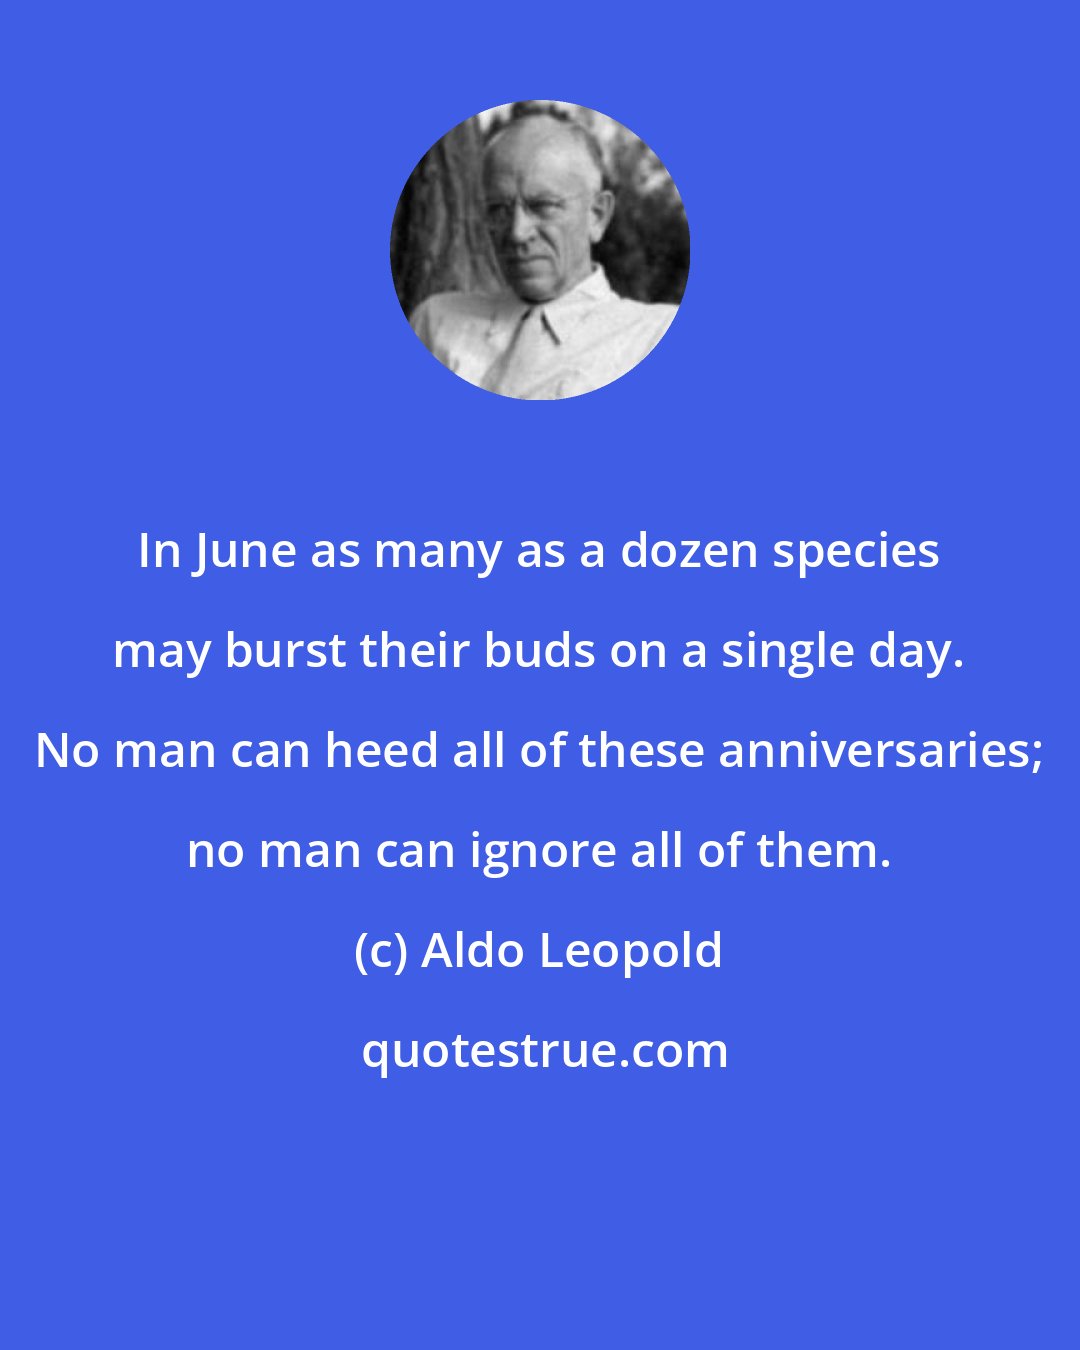 Aldo Leopold: In June as many as a dozen species may burst their buds on a single day. No man can heed all of these anniversaries; no man can ignore all of them.